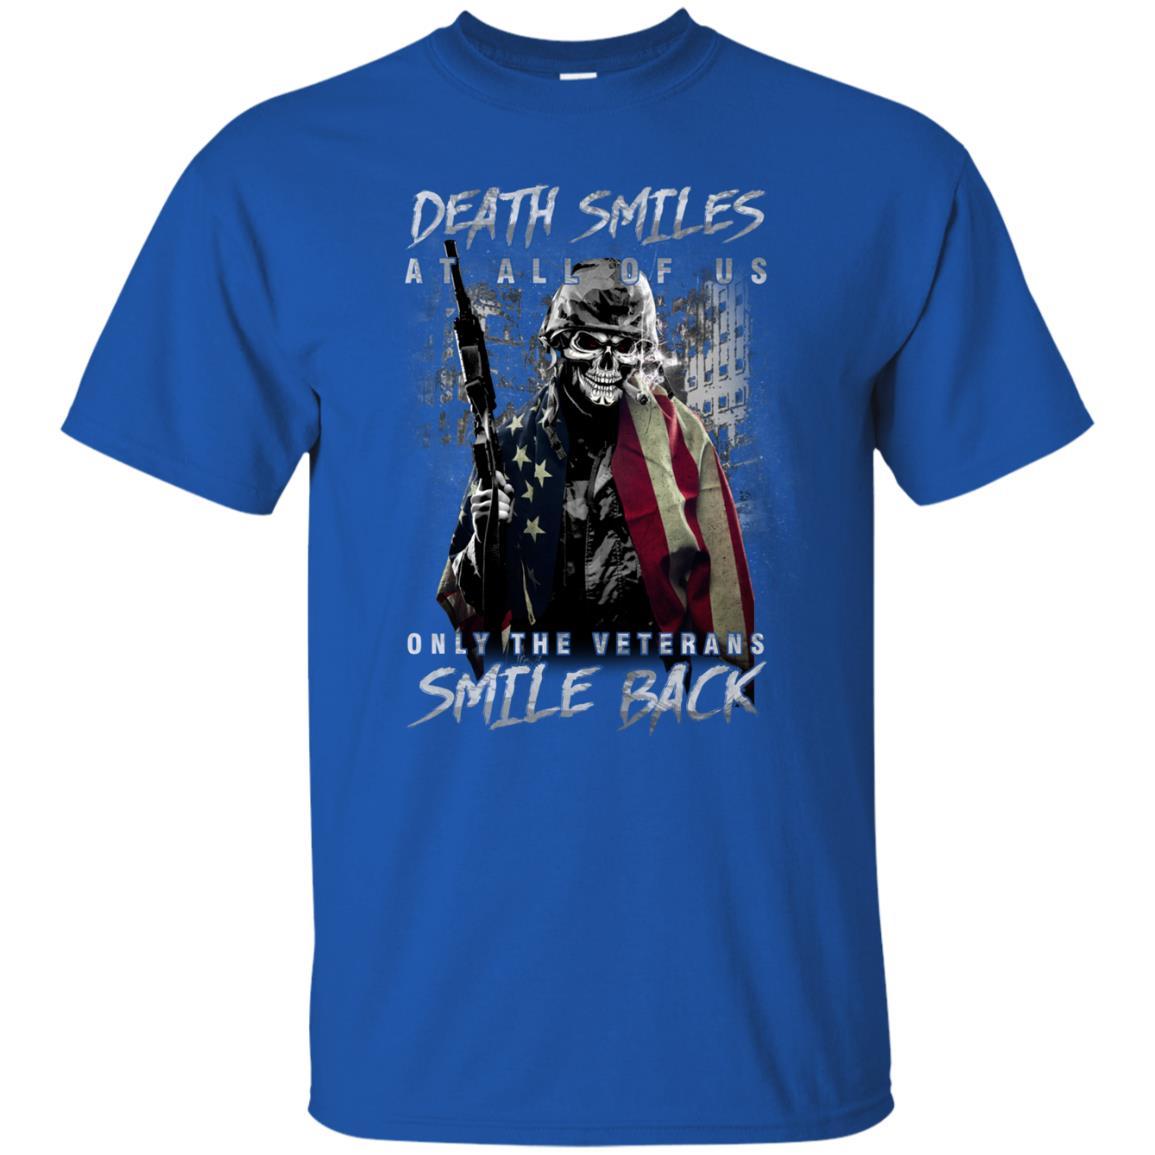 Military T-Shirt "Death Smiles At All Of Us - Only The Veterans Smile Back Men On" Front-TShirt-General-Veterans Nation